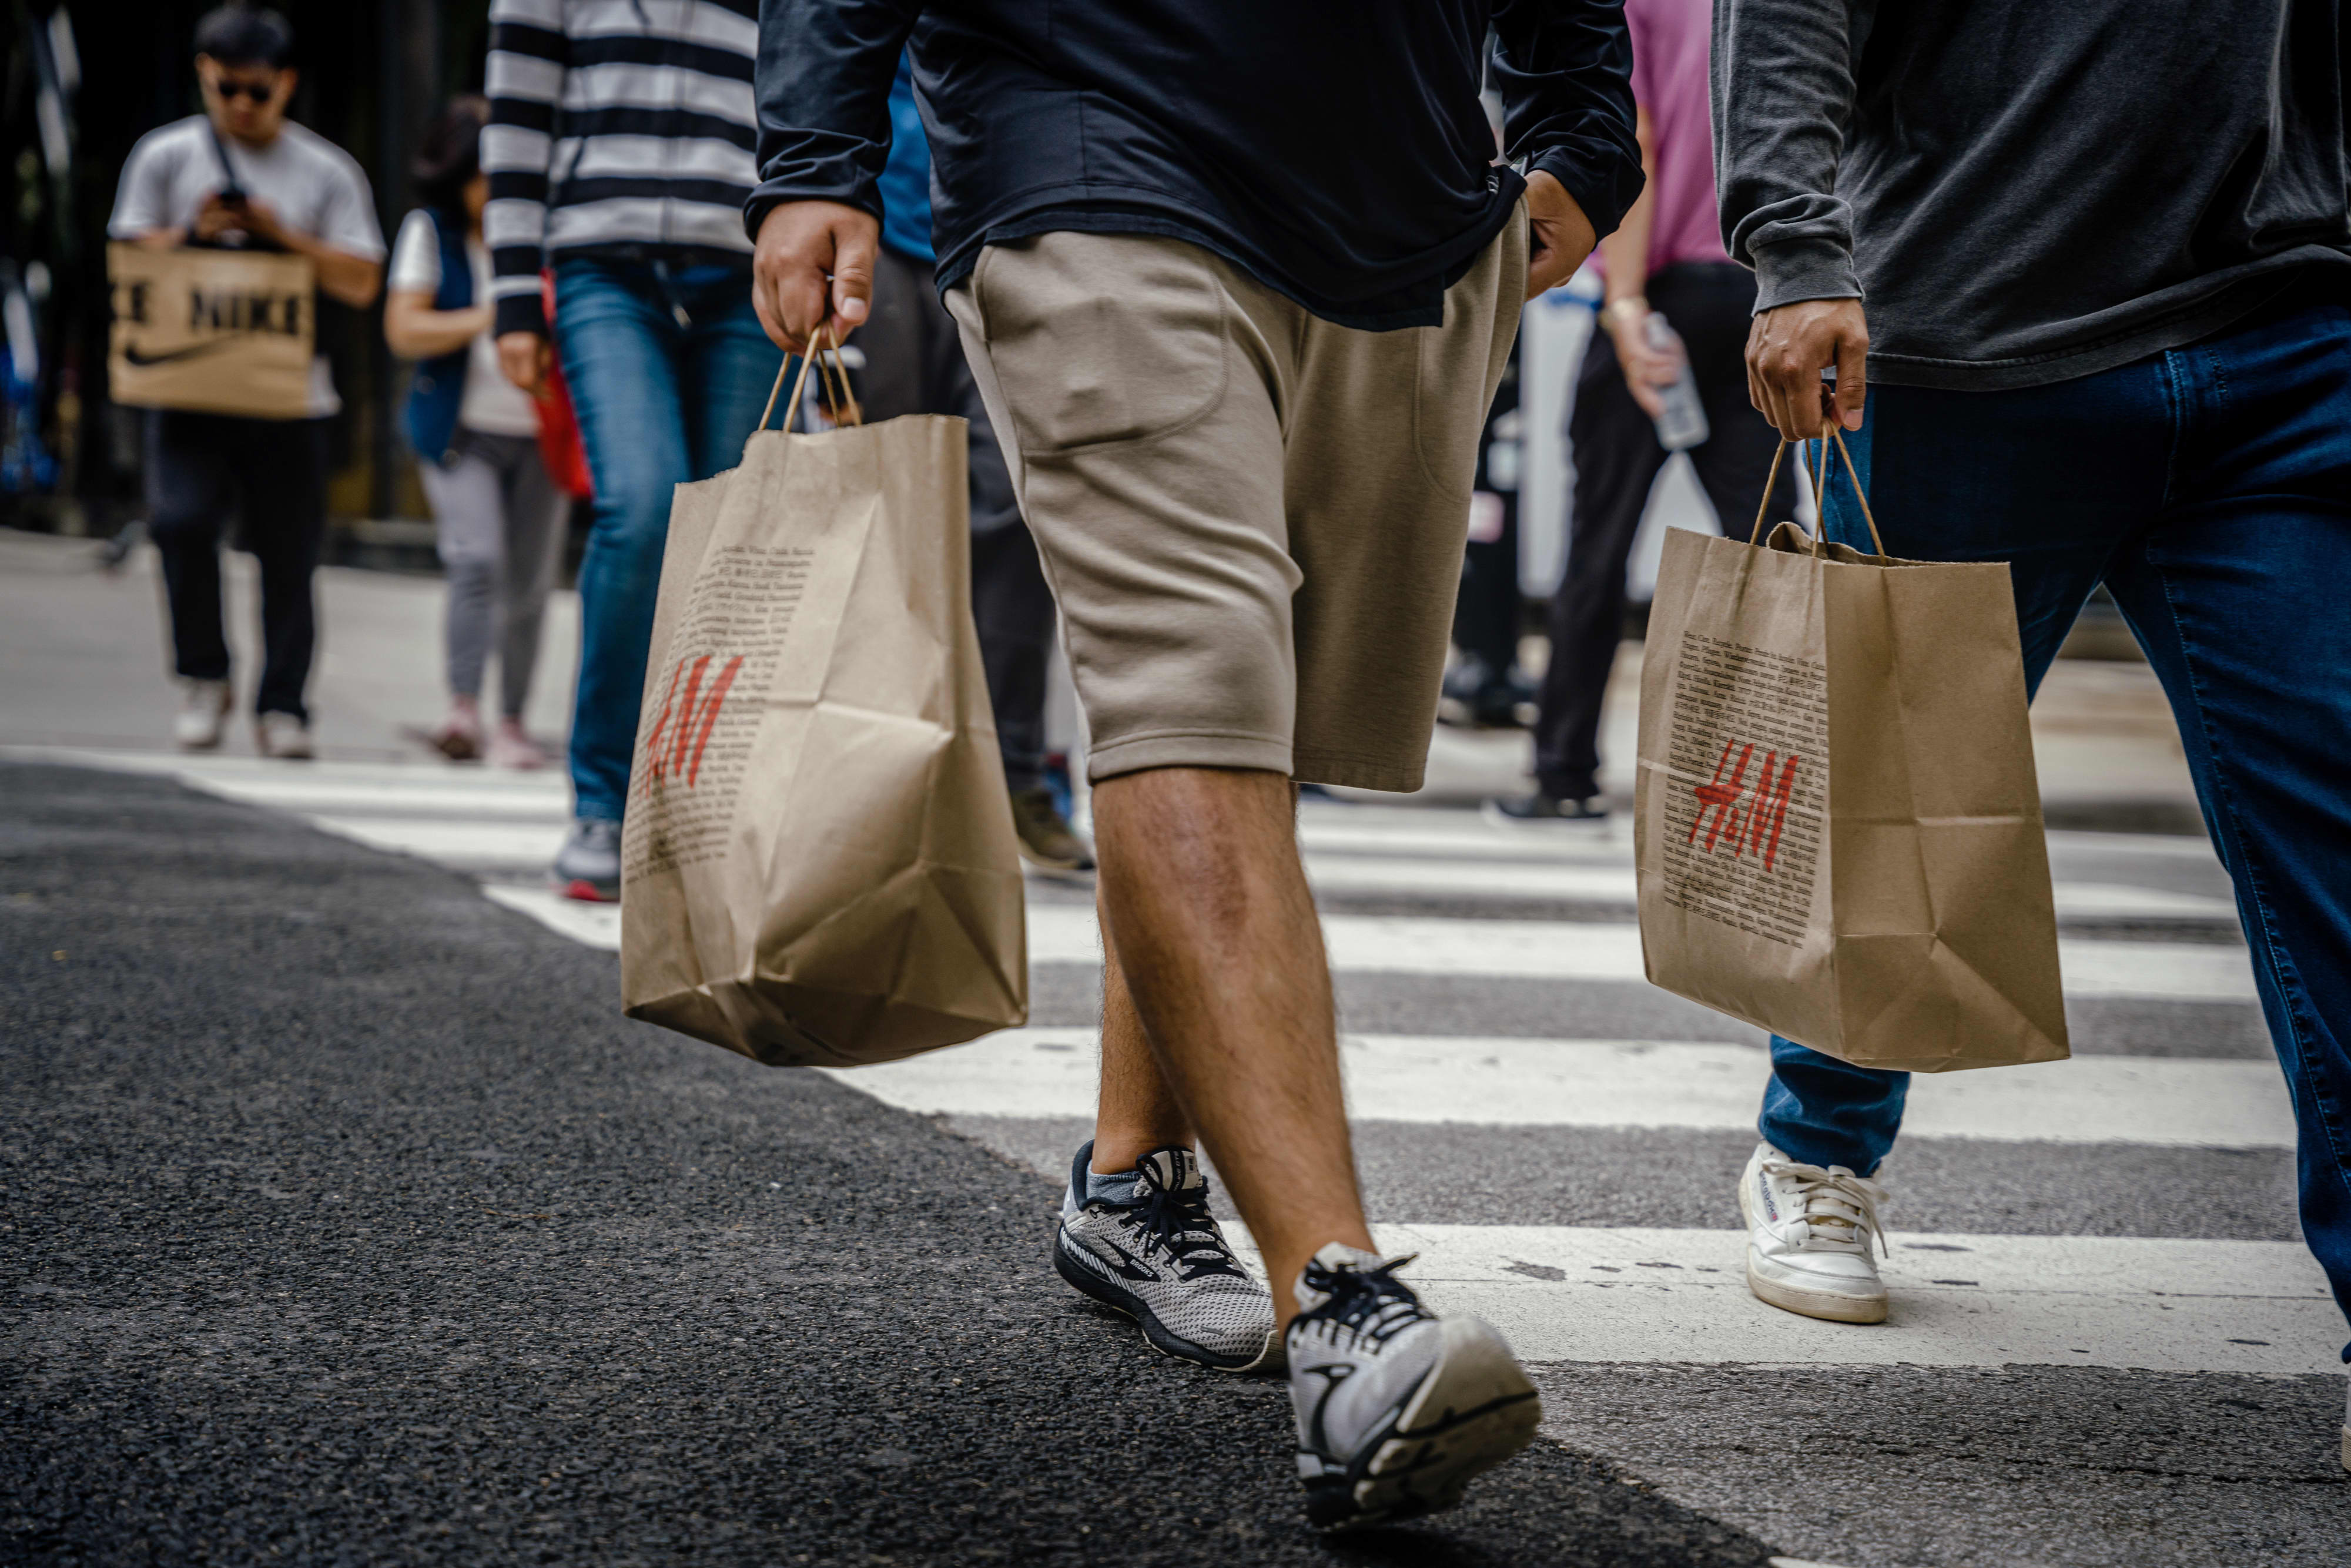 The strategist warns that the American consumer is “walking towards the abyss.”